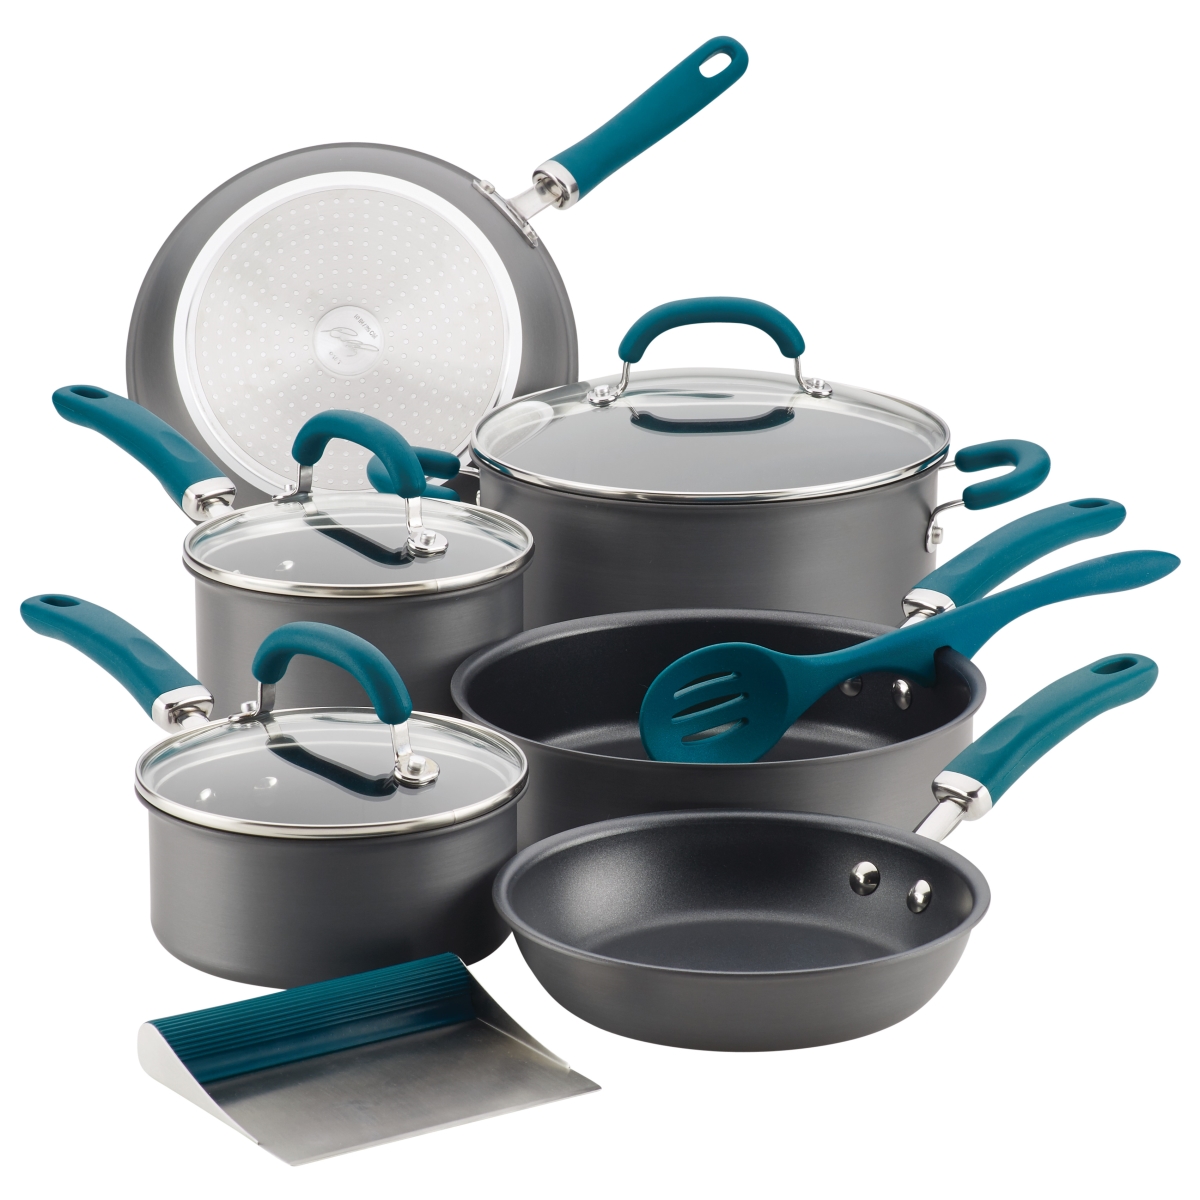 Picture of Rachael Ray 81123 Create Delicious Hard-Anodized Aluminum Nonstick Cookware Set, 11 Piece - Teal Handles